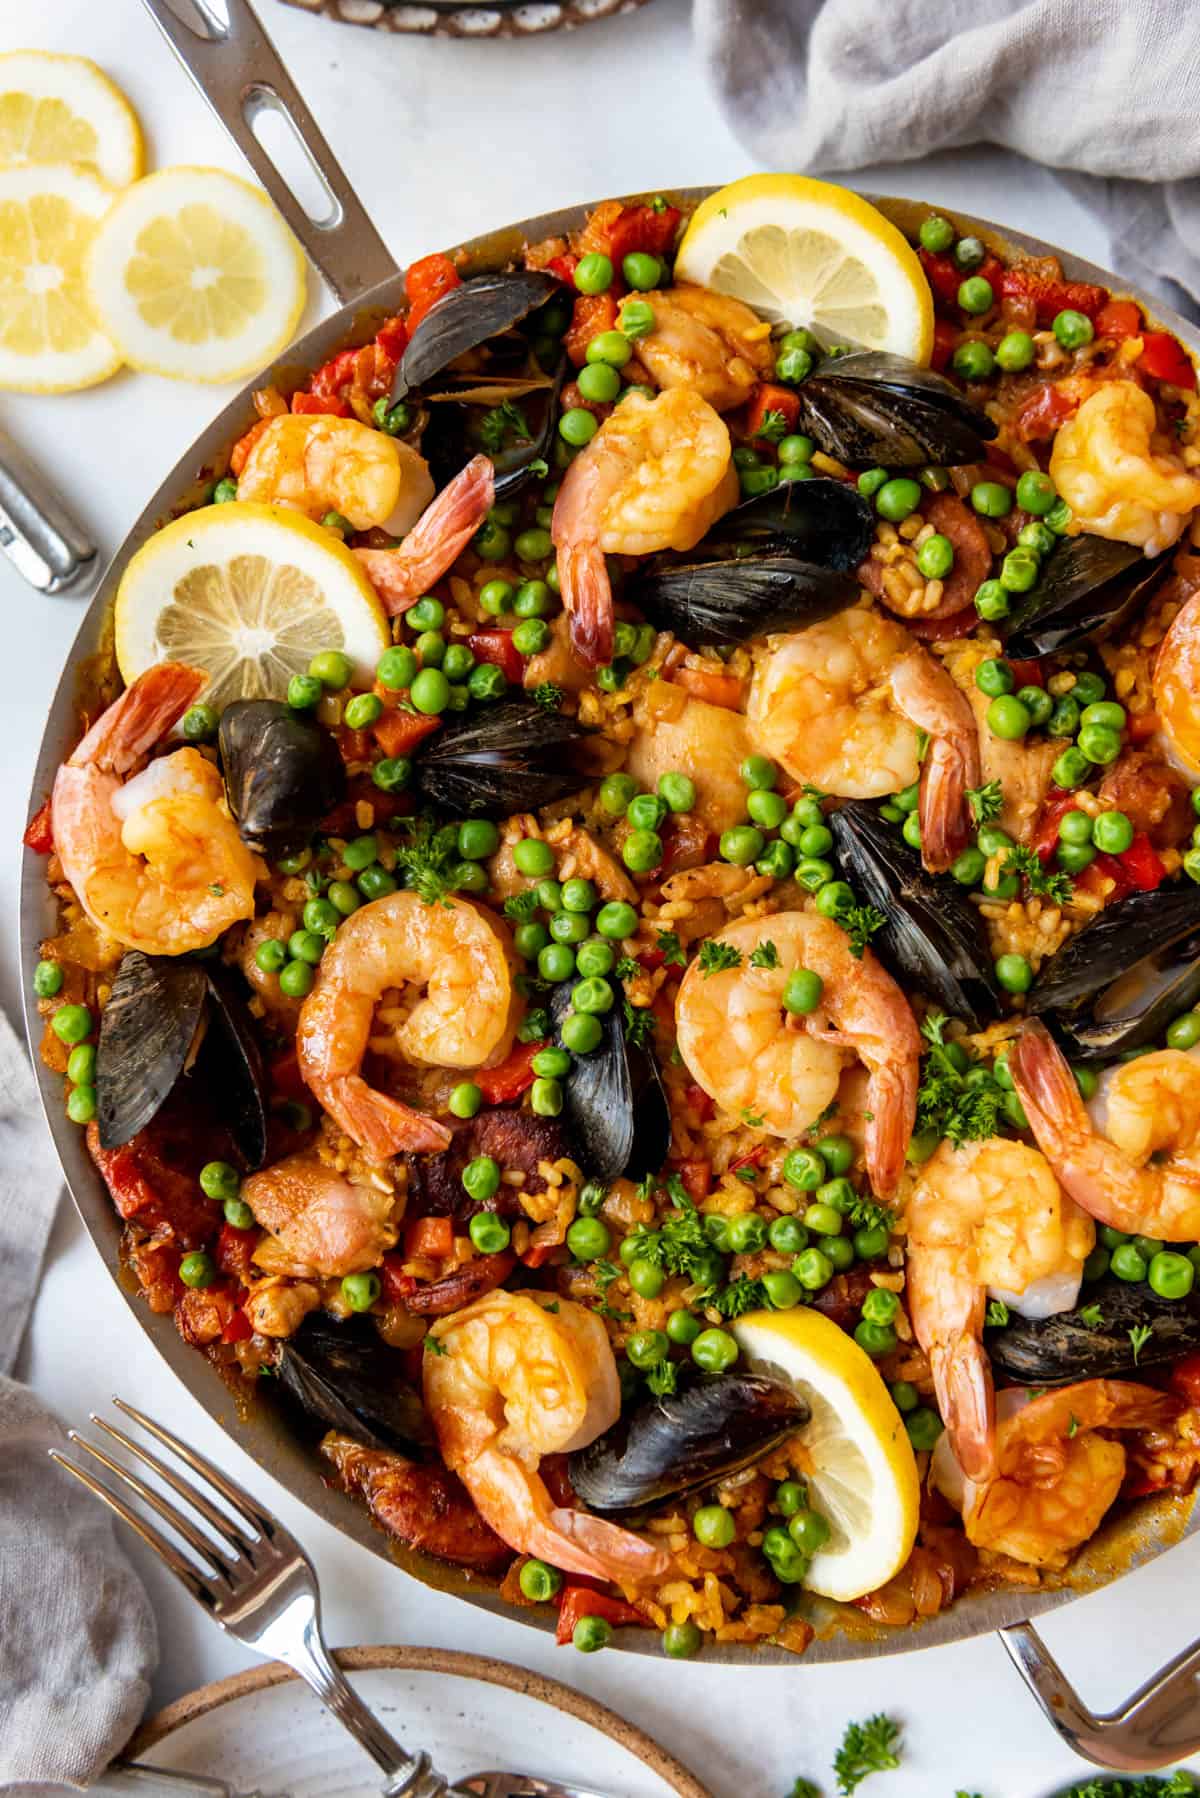 An overhead image of a large skillet of paella.